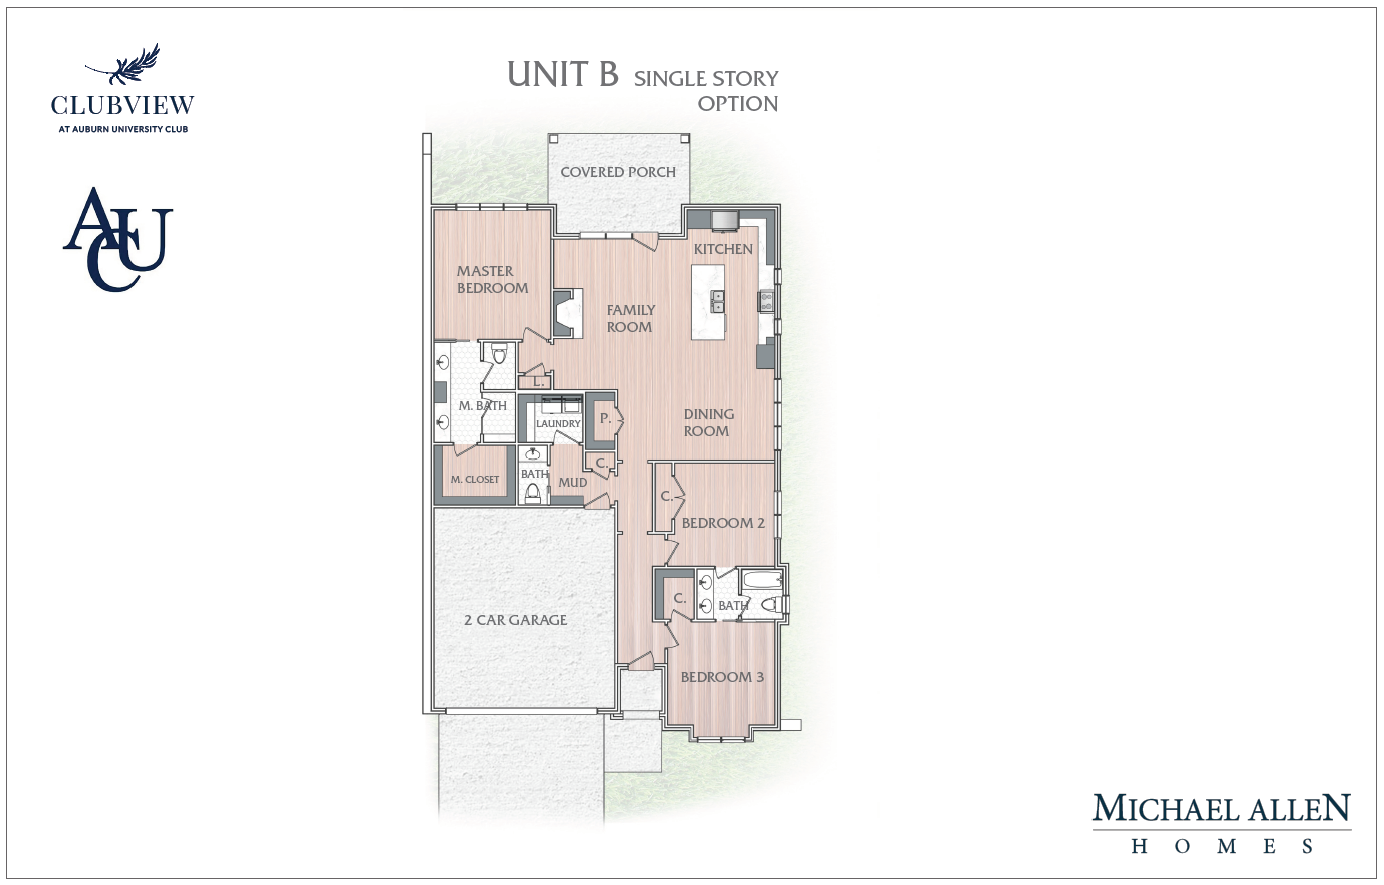 A floor plan for a house called unit b